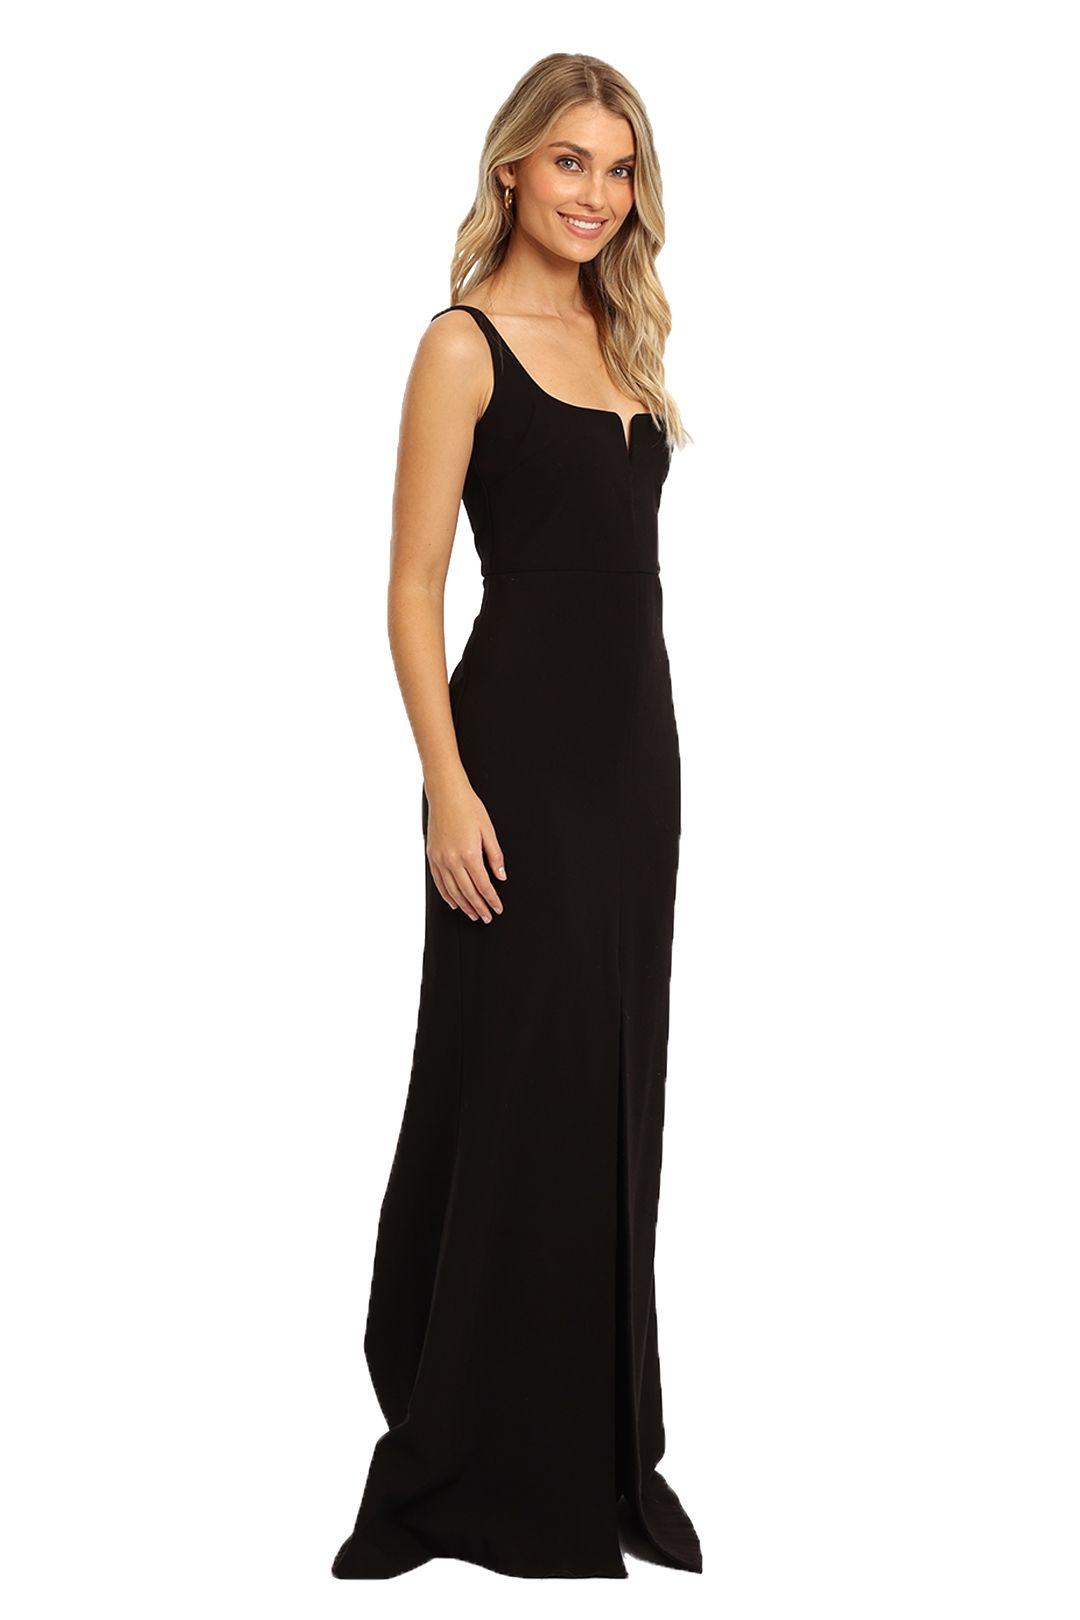 Likely NYC Constance Gown in Black Bodycon